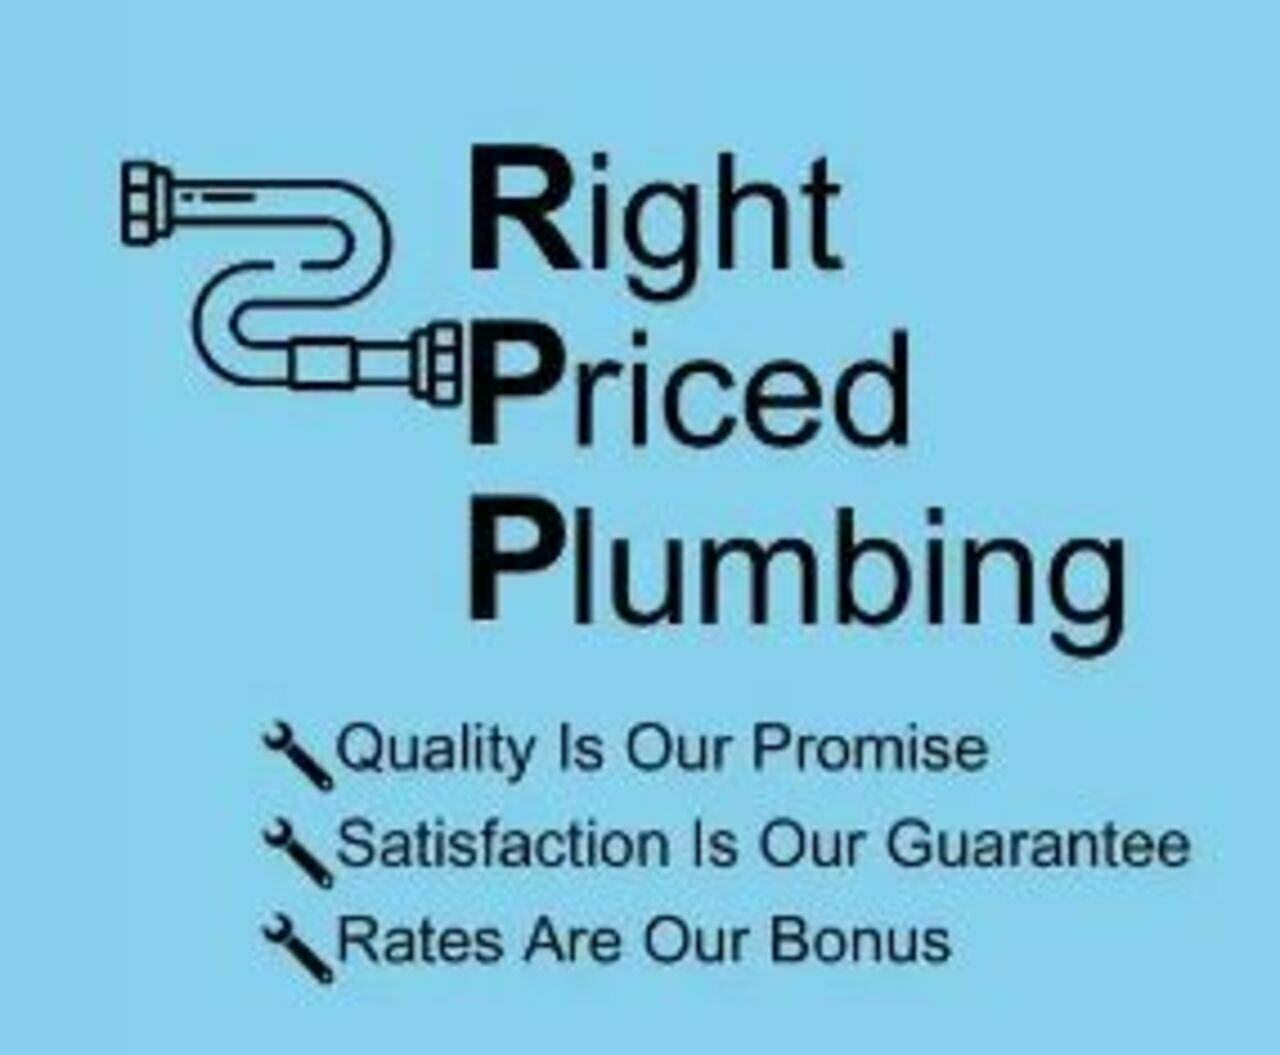 Priced Right Plumbing & Drains's logo